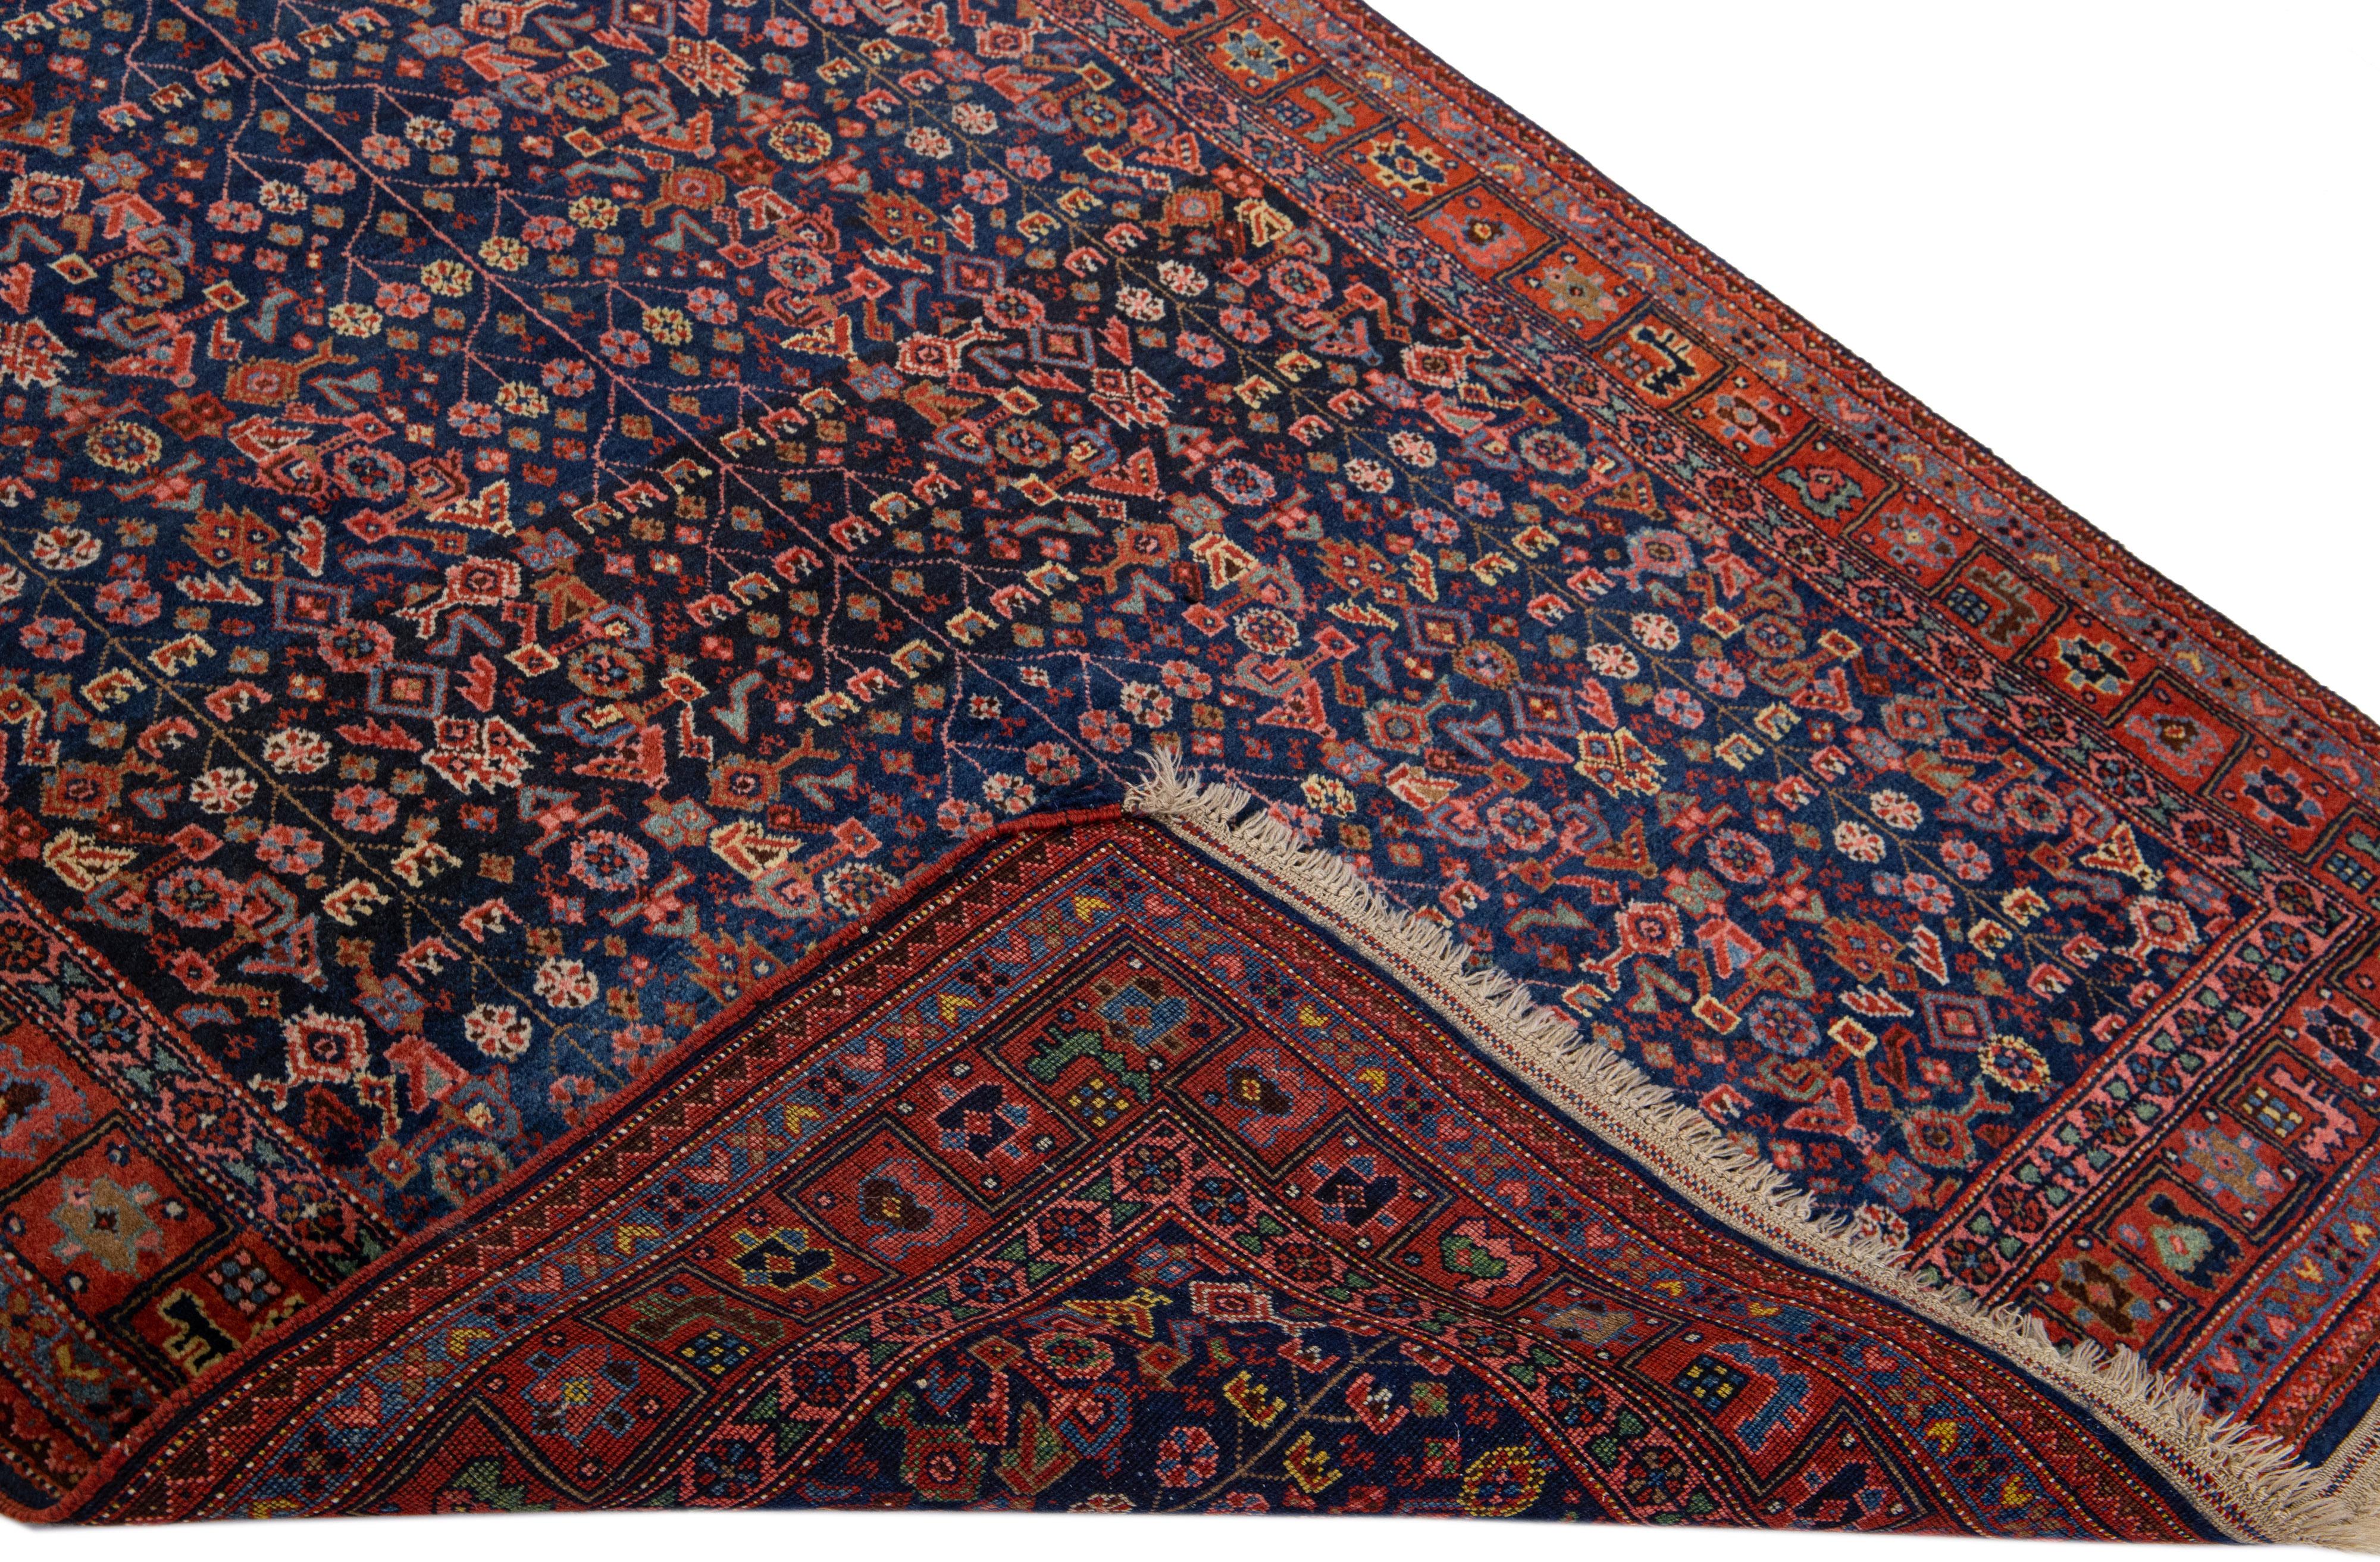 Beautiful antique Persian Bidjar hand-knotted wool rug with rust and a blue field. This Piece has a multicolor accents medallion floral design.

This rug measures 4'6